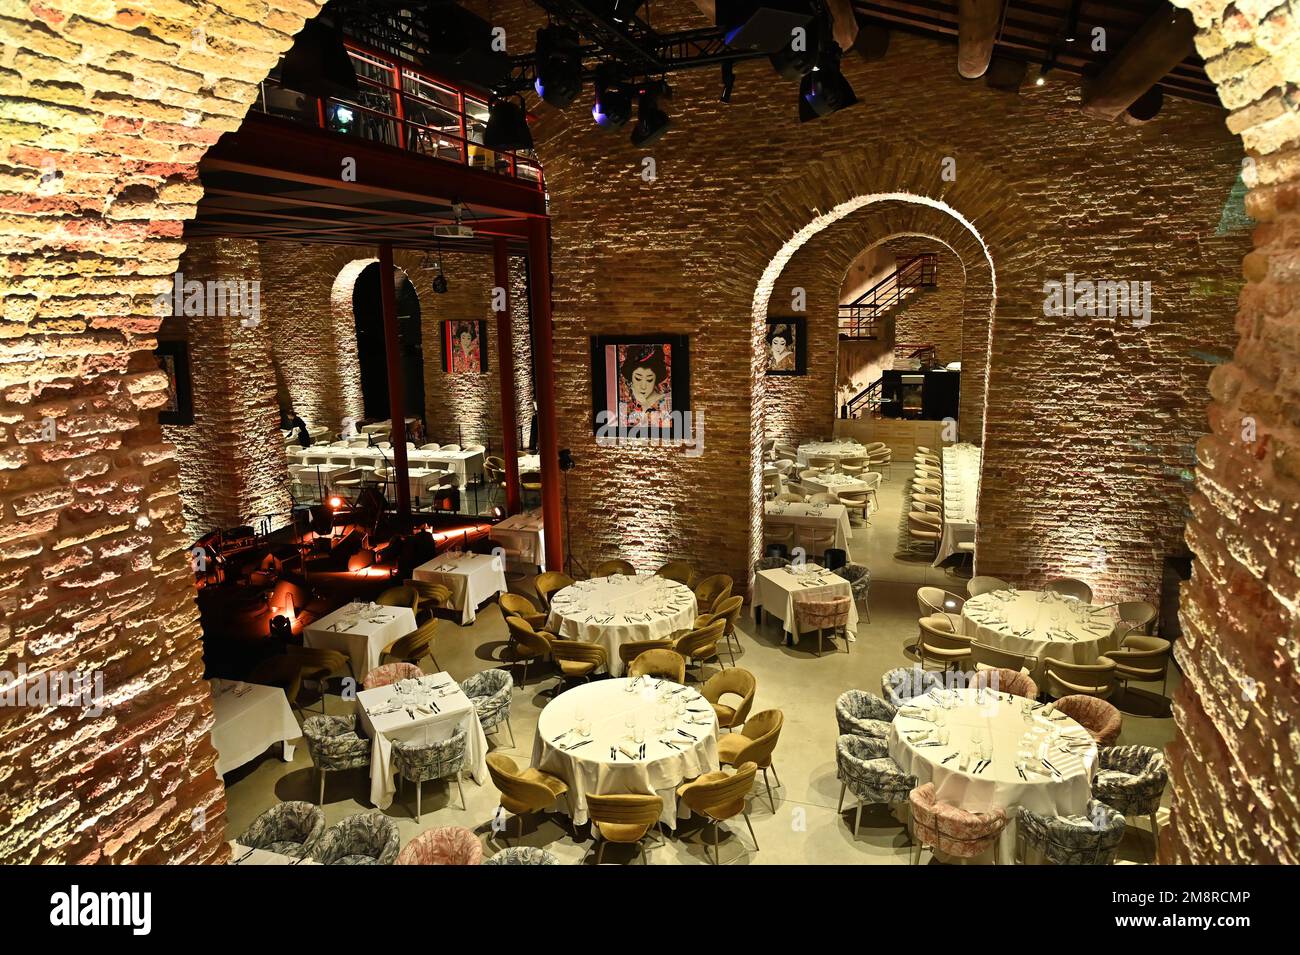 Panoramic view inside the 'Darsena del Sale' this complex dating 1700s has been restored and converted into a restaurant, beauty SPA, and cultural Stock Photo